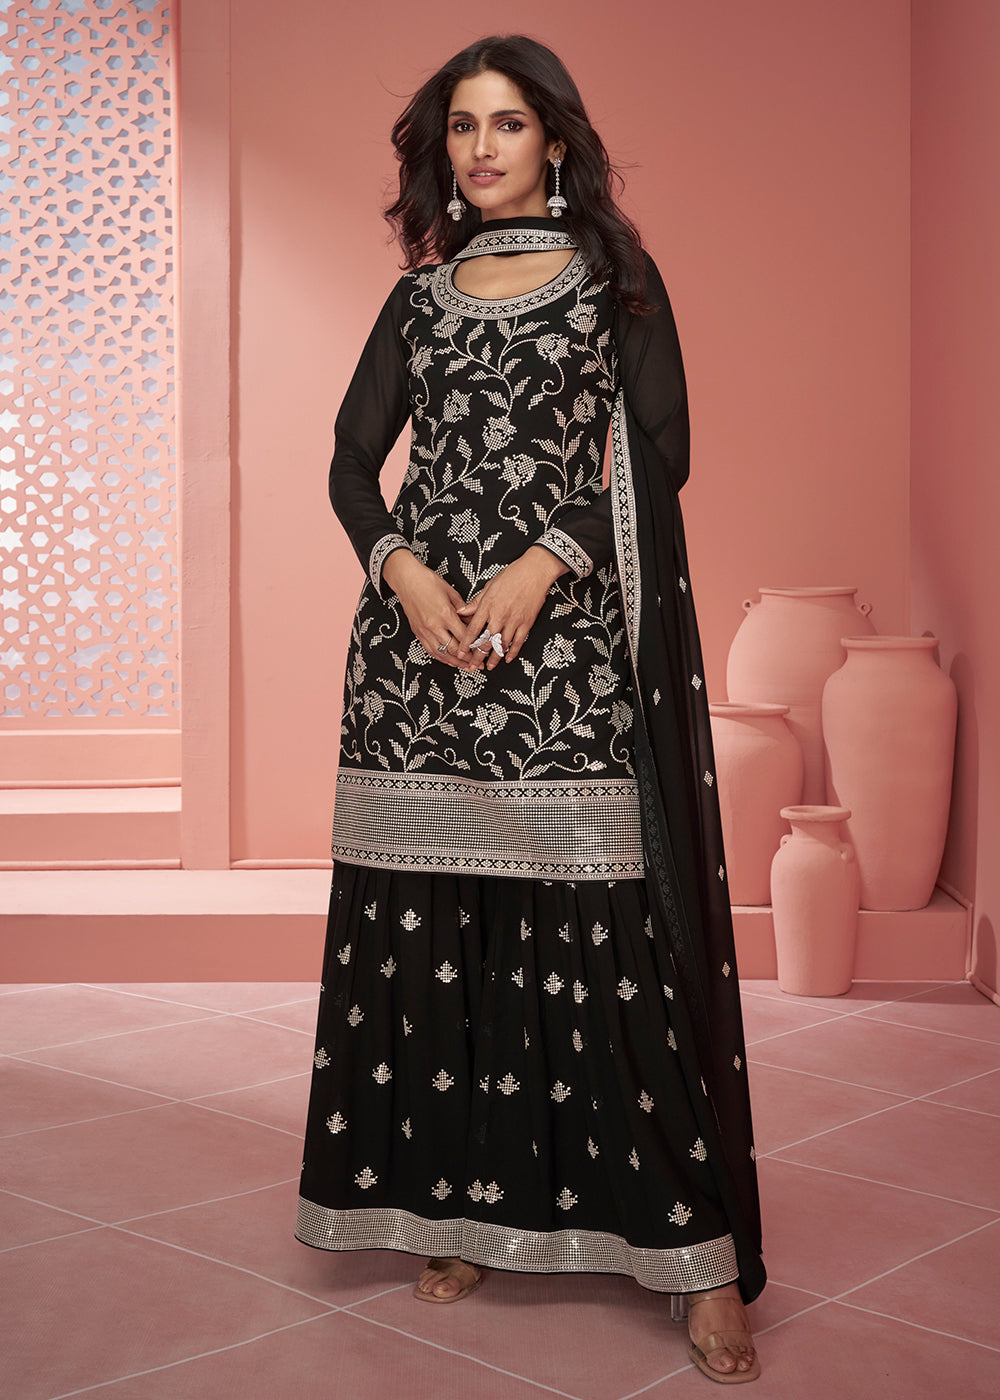 Buy Now Georgette Attractive Black Embroidered Palazzo Suit Online in USA, UK, Canada, Germany, Australia & Worldwide at Empress Clothing.